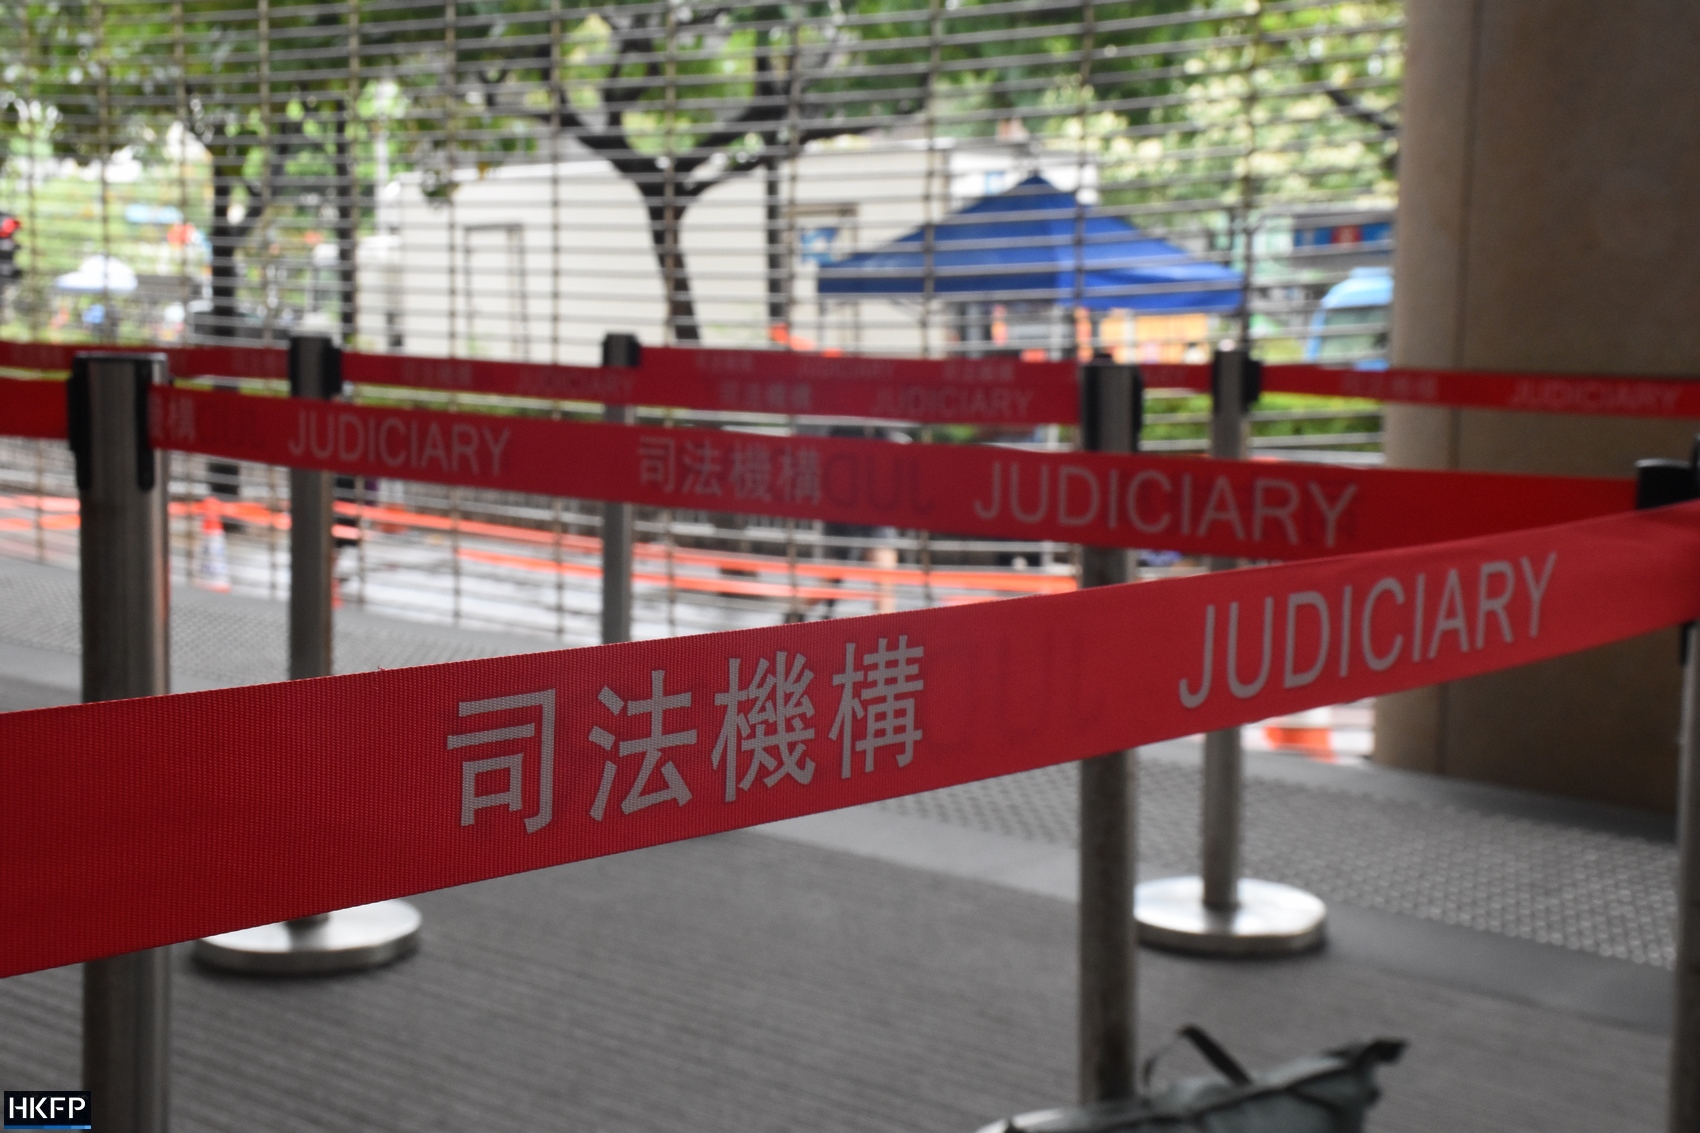 47 democrats west kowloon law magistrate court judiciary